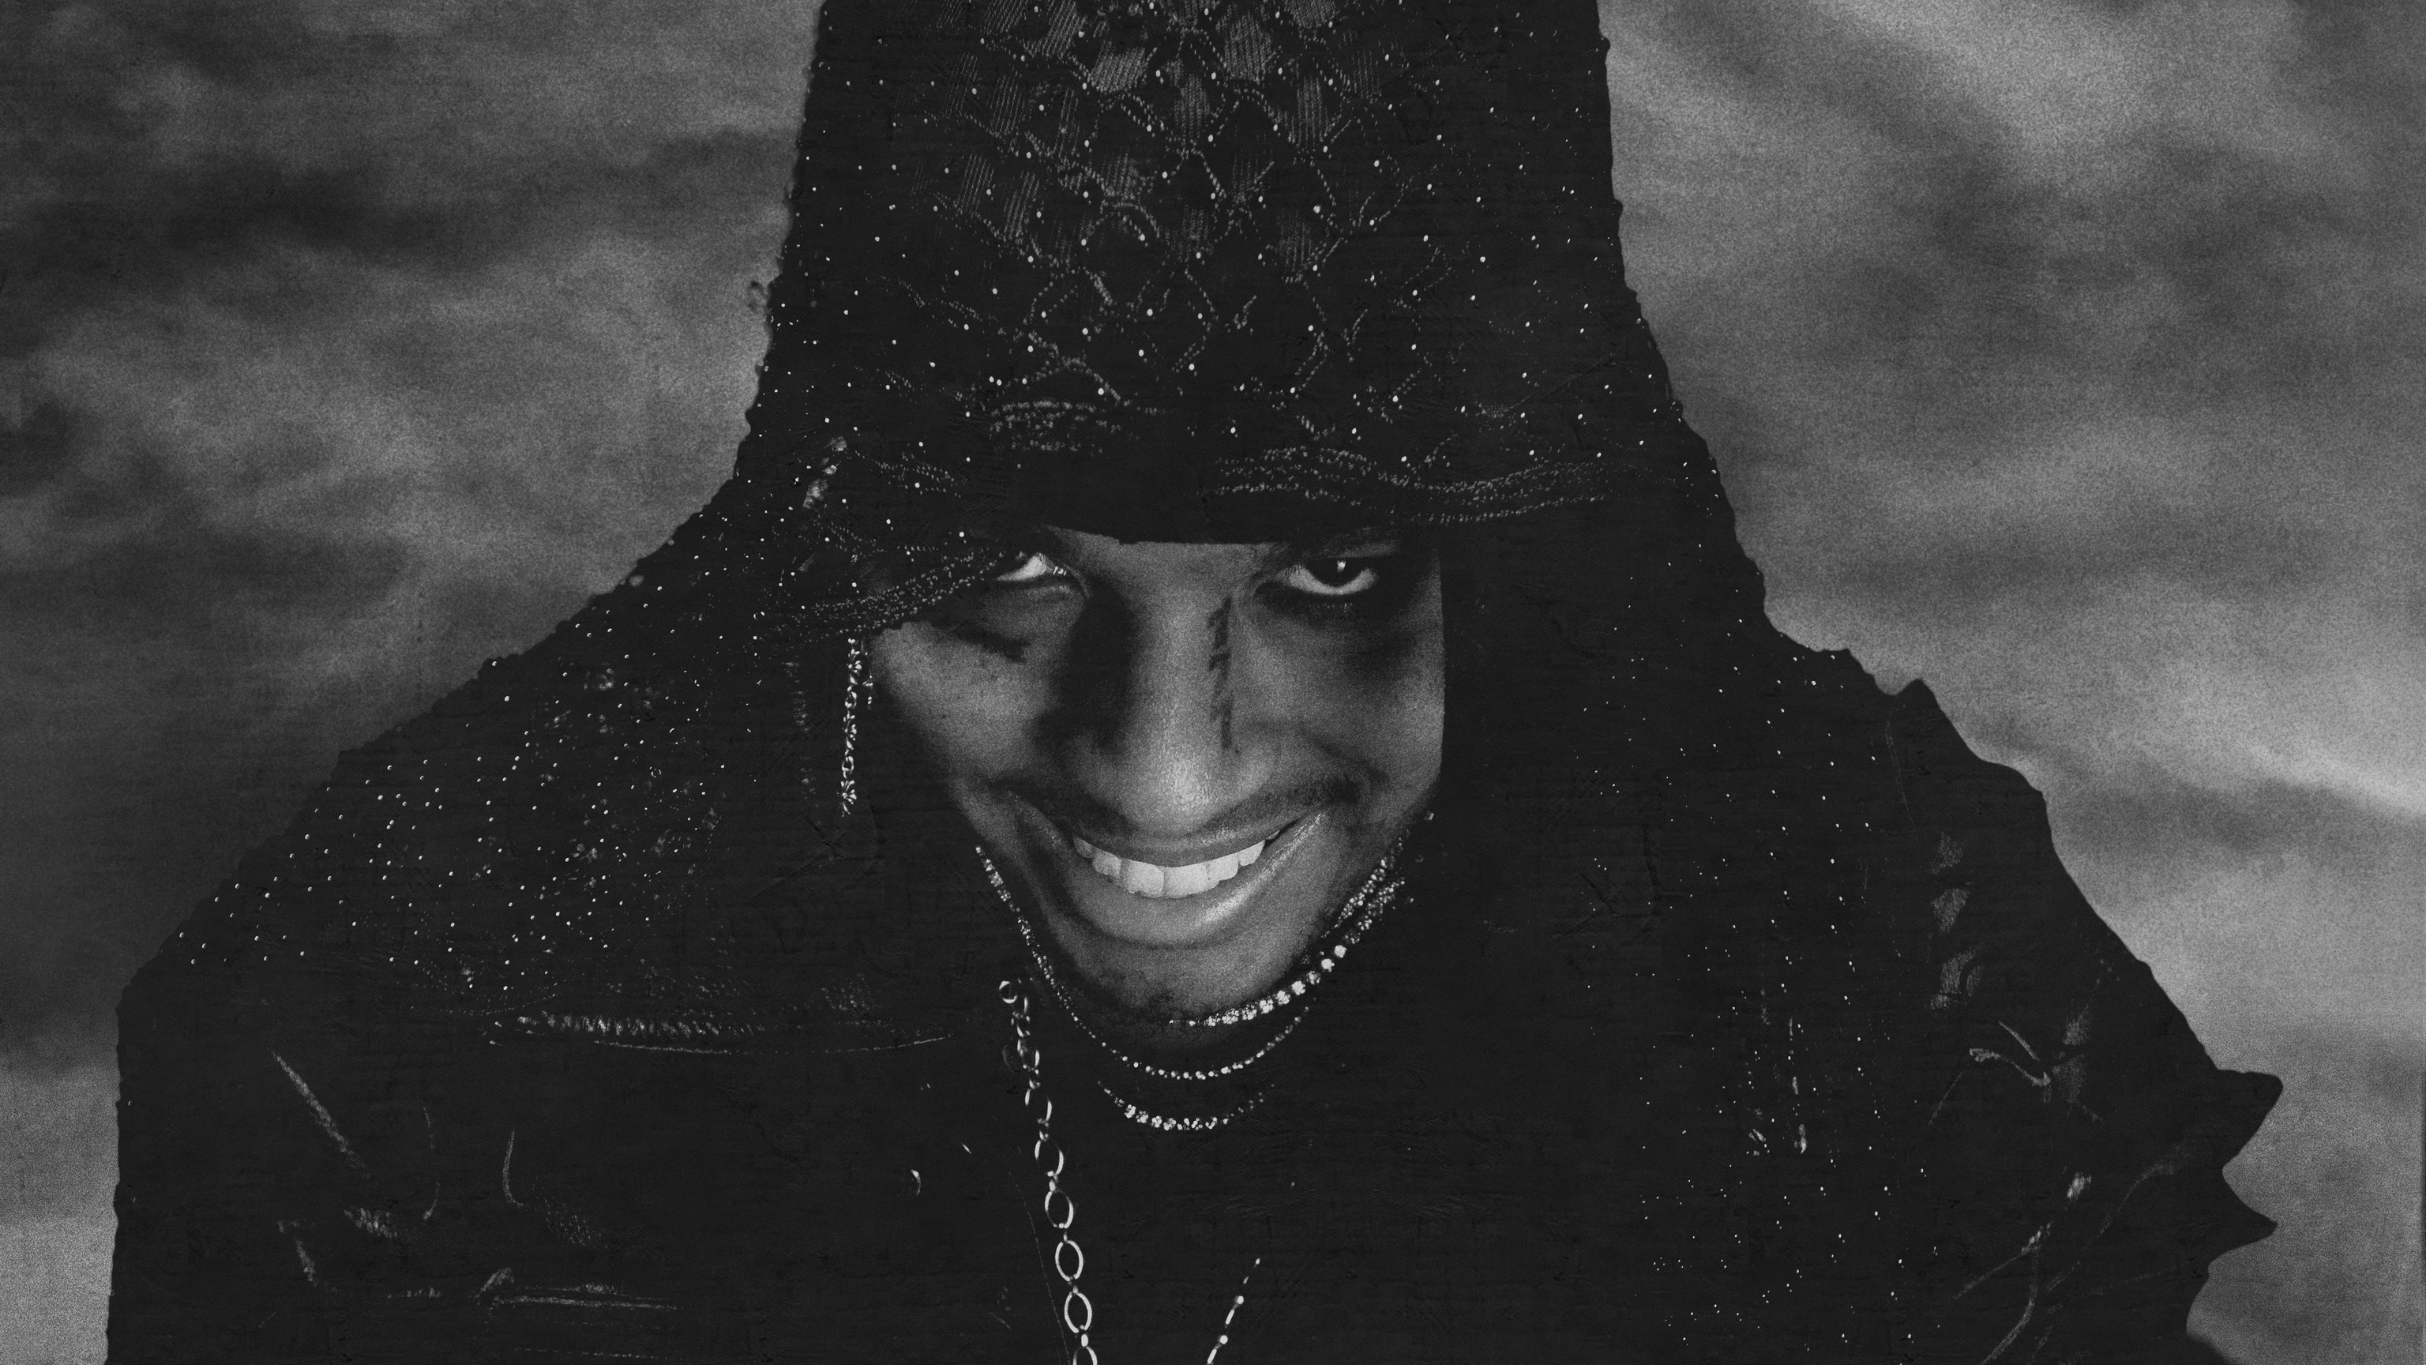 Ski Mask The Slump God - 11th Dimension Tour pre-sale passcode for event tickets in Brooklyn, NY (Brooklyn Paramount)